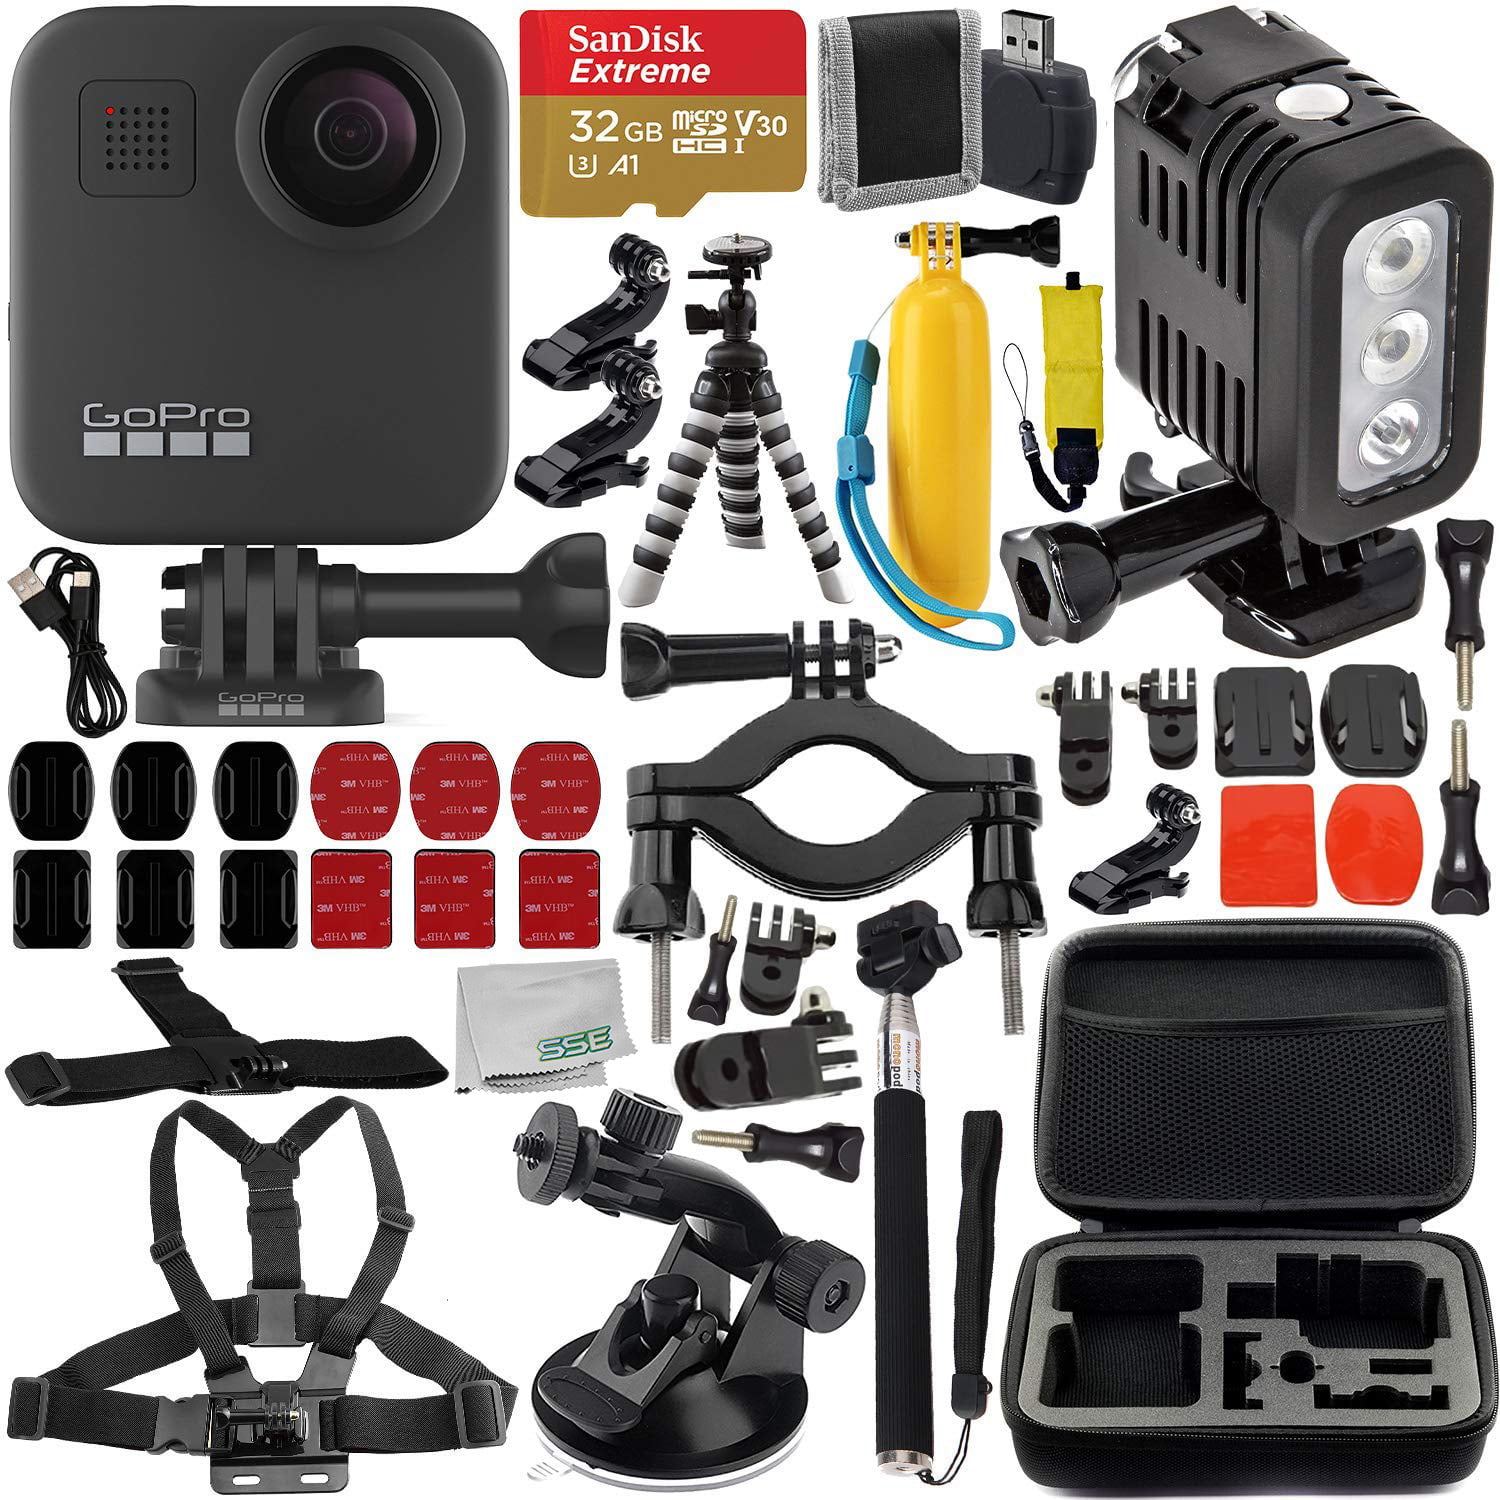 Gopro Max 360 Action Camera With Premium Accessory Bundle Includes Sandisk Extreme 32gb Microsdhc Memory Card Rechargeable Underwater Led Light Protective Carrying Case Much More Walmart Com Walmart Com